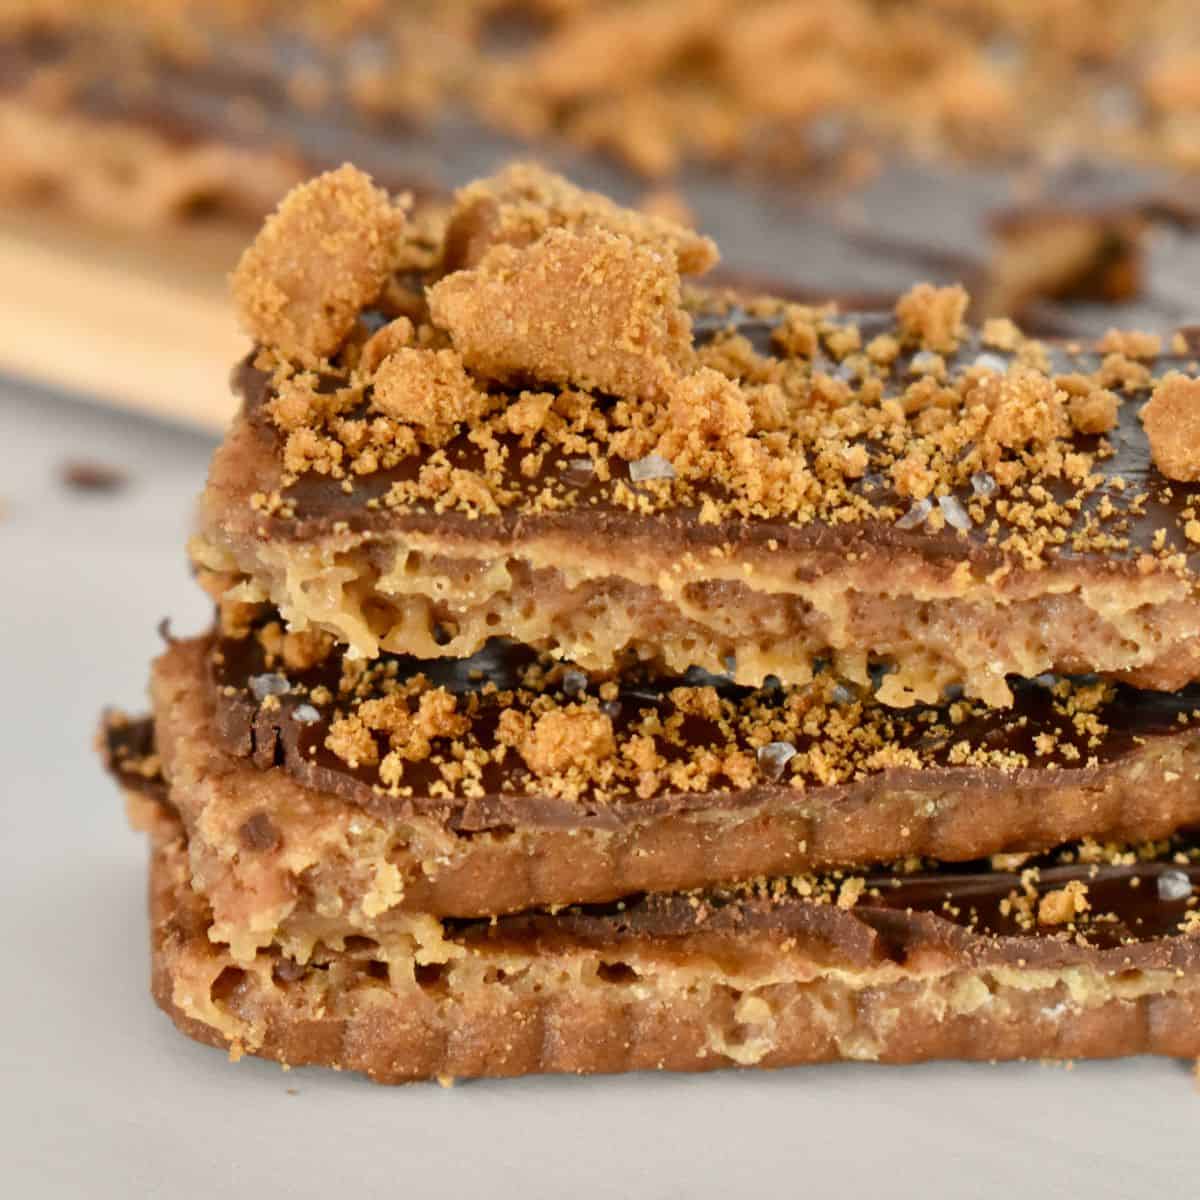 Biscoff Toffee - This Delicious House